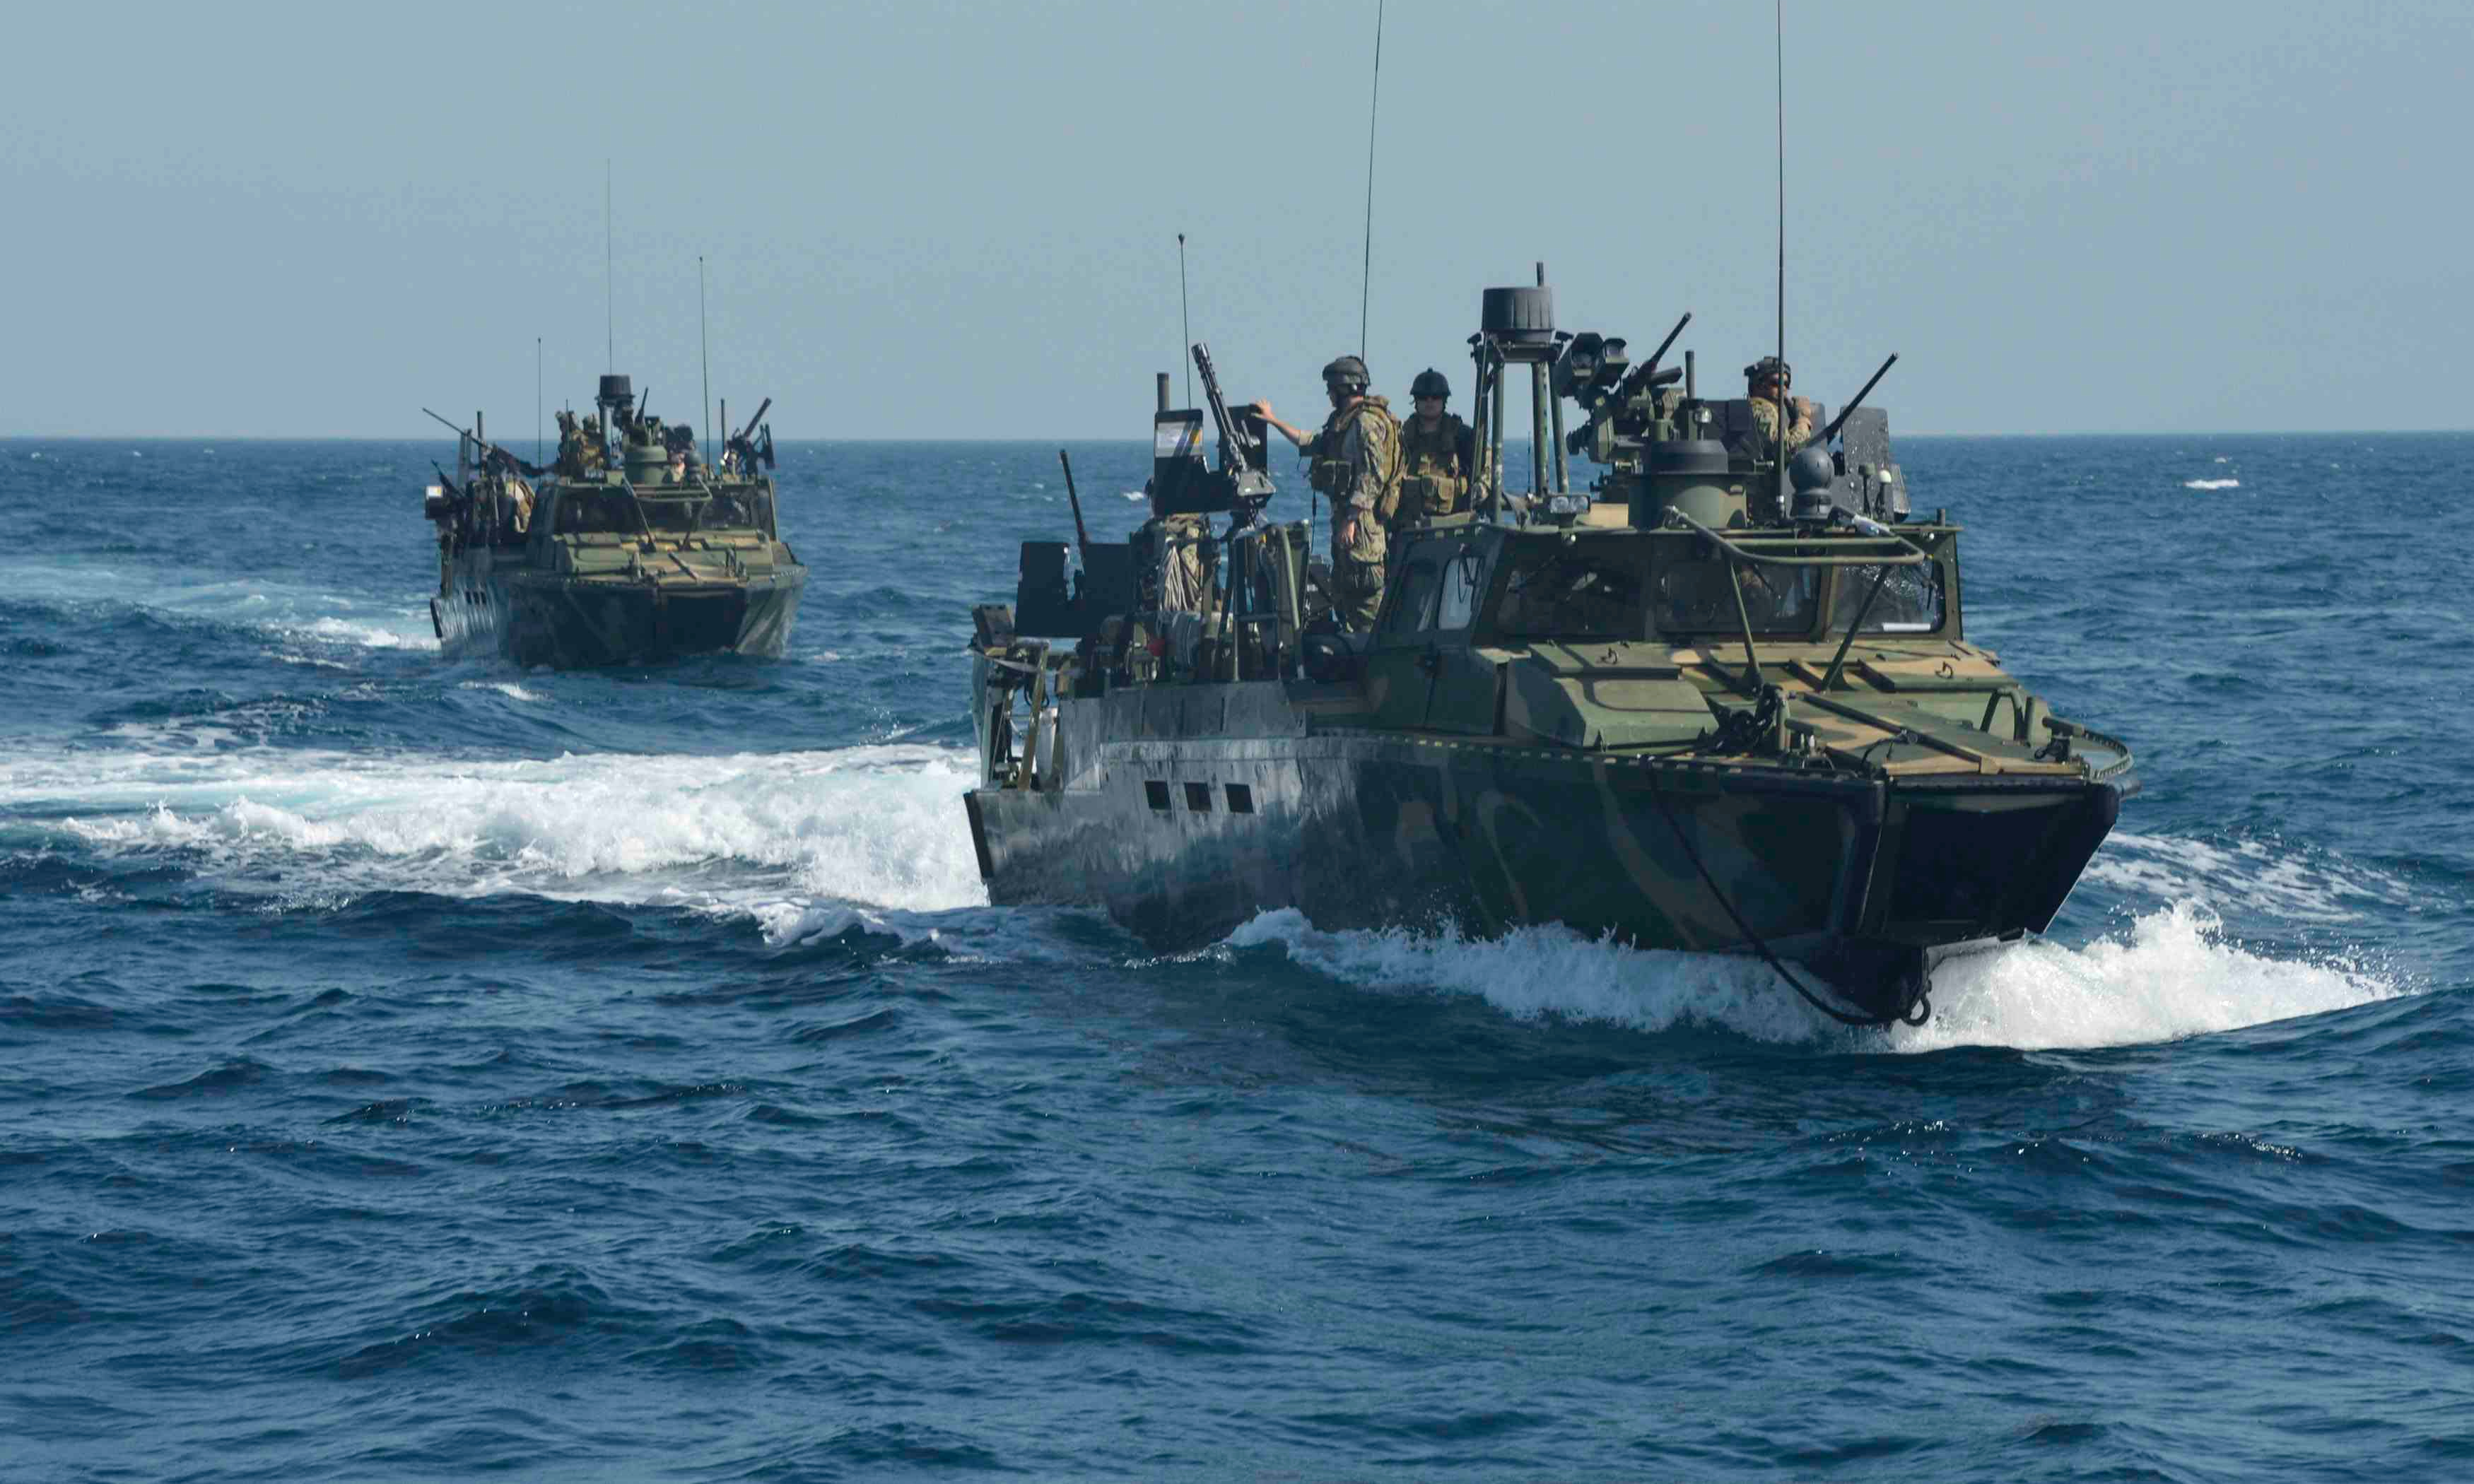 Were the U.S. Boats Off Course in the Persian Gulf an Actual Example of the Mythical “Rogue Operation”?